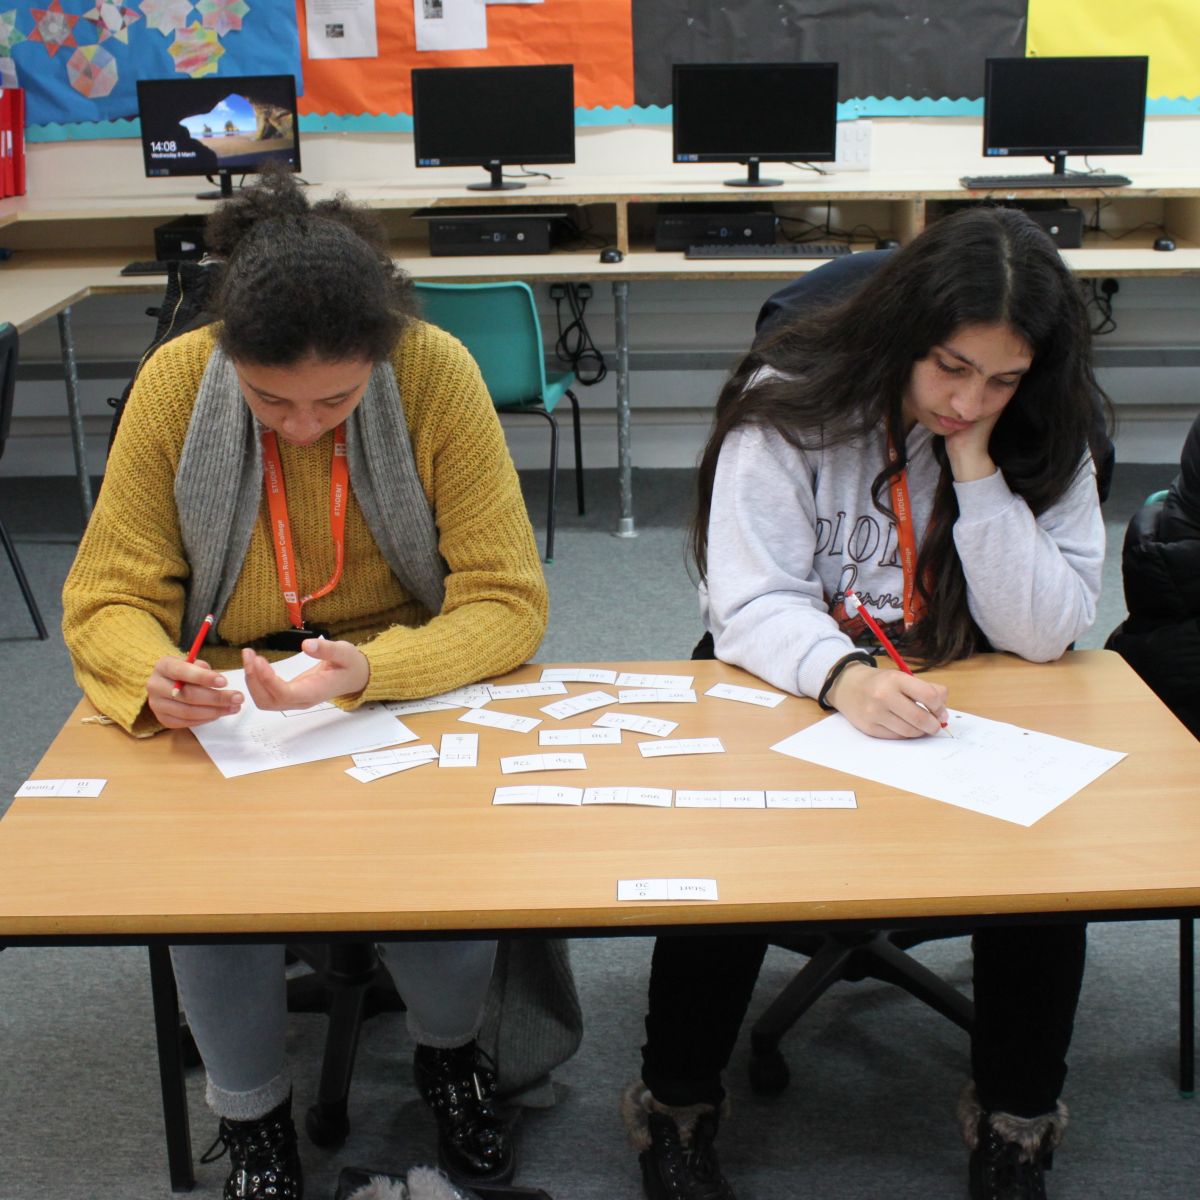 Chanttelle and Eman working on their tarsia puzzle